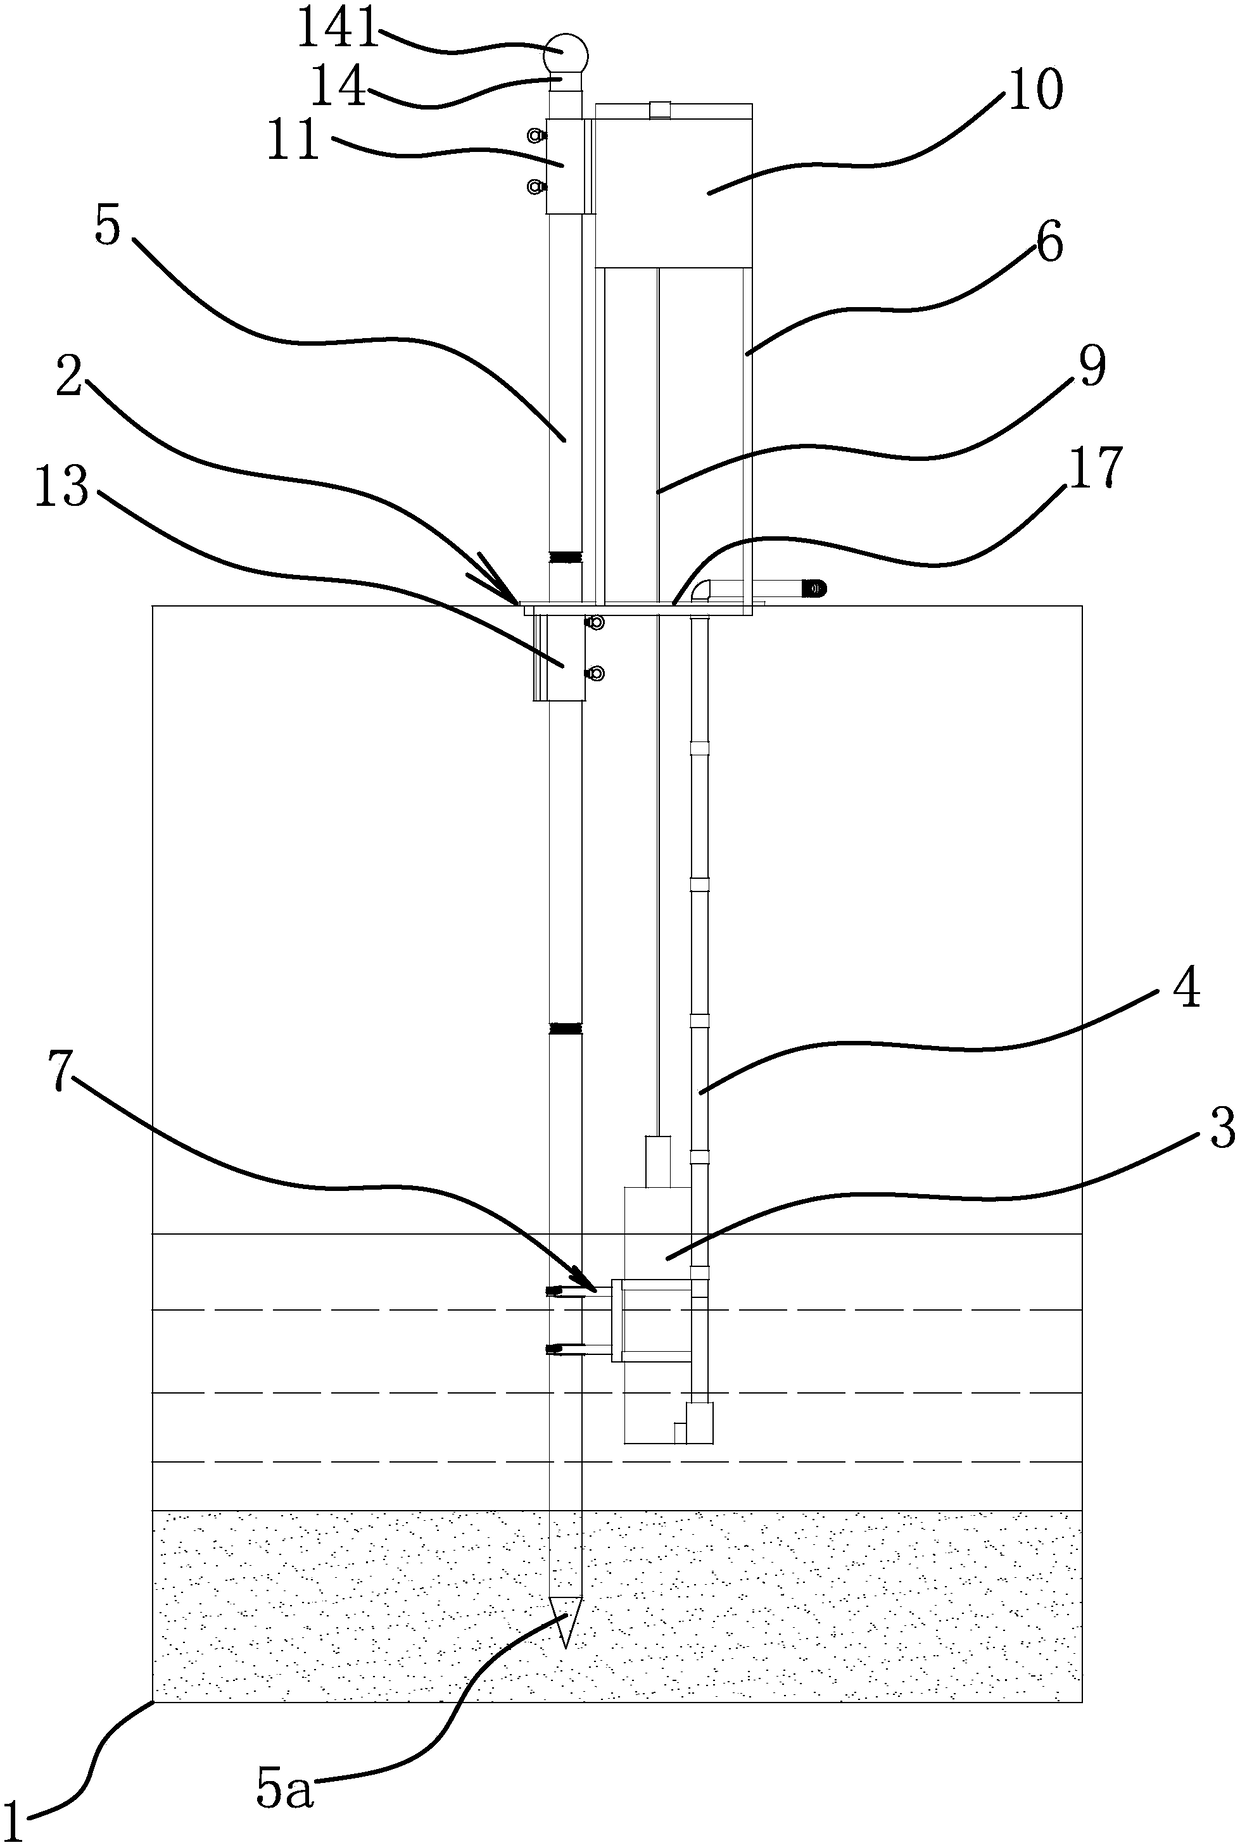 Installation structure of detection sampling device in wastewater treatment system